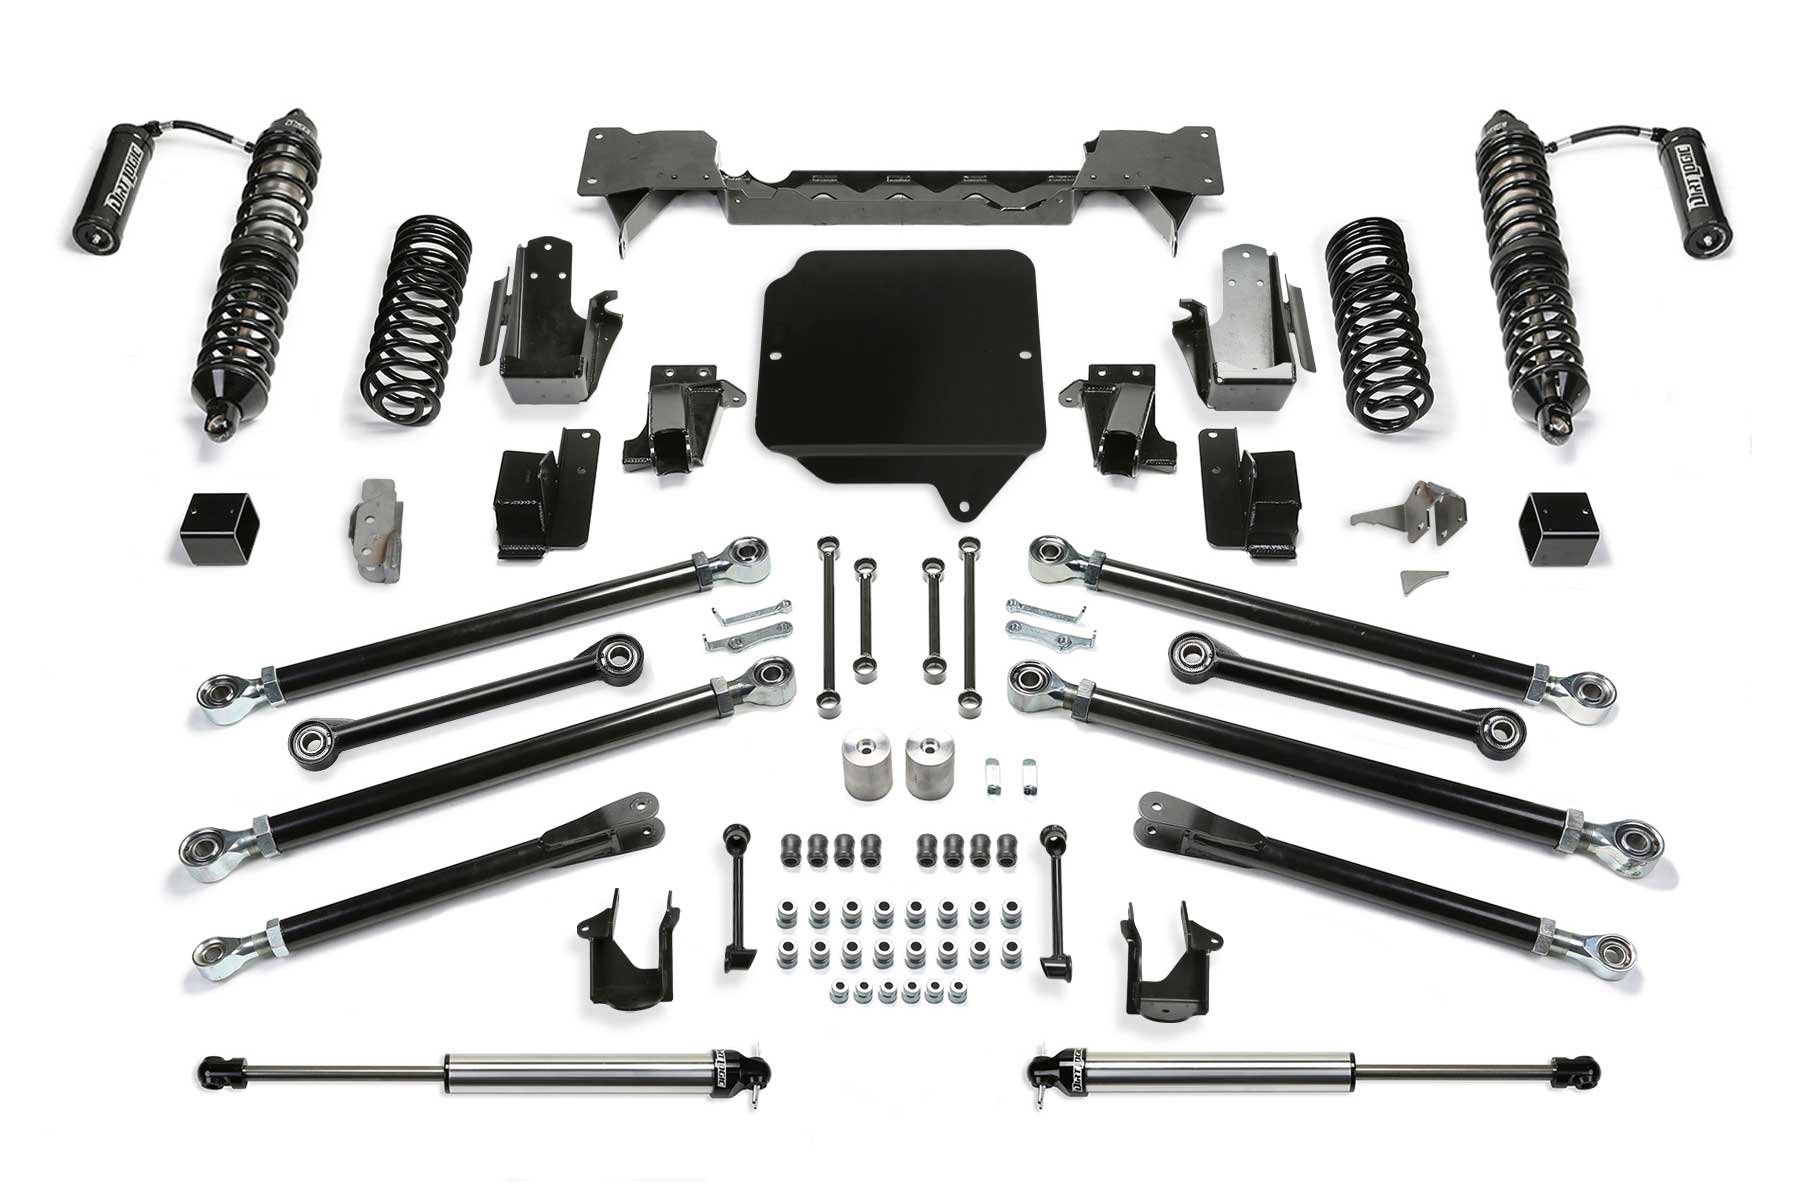 Fabtech 5″ Crawler Coilover Lift Kit for 18-20 Jeep Wrangler JL Unlimited |  Quadratec